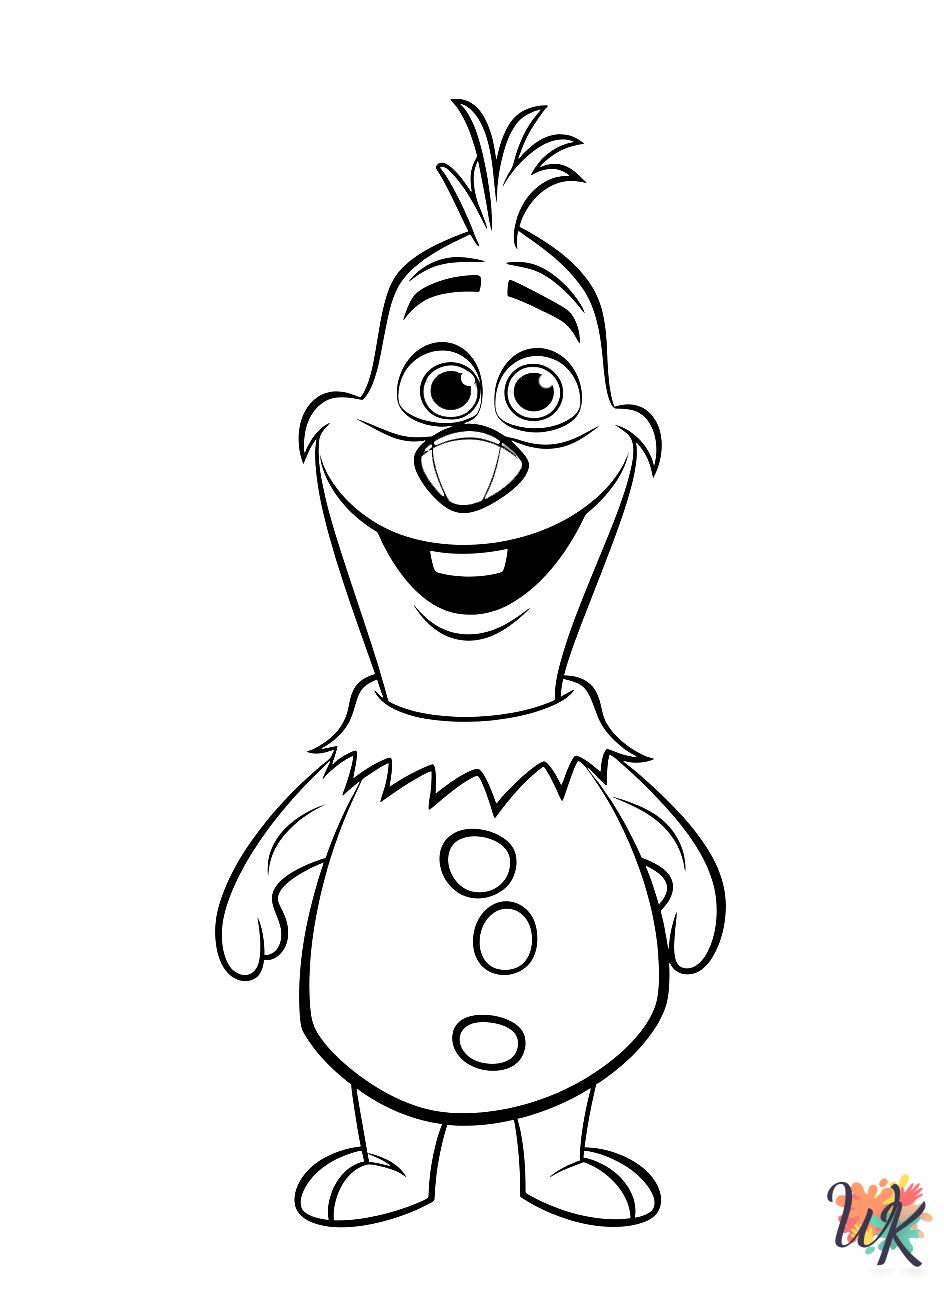 Olaf free coloring pages